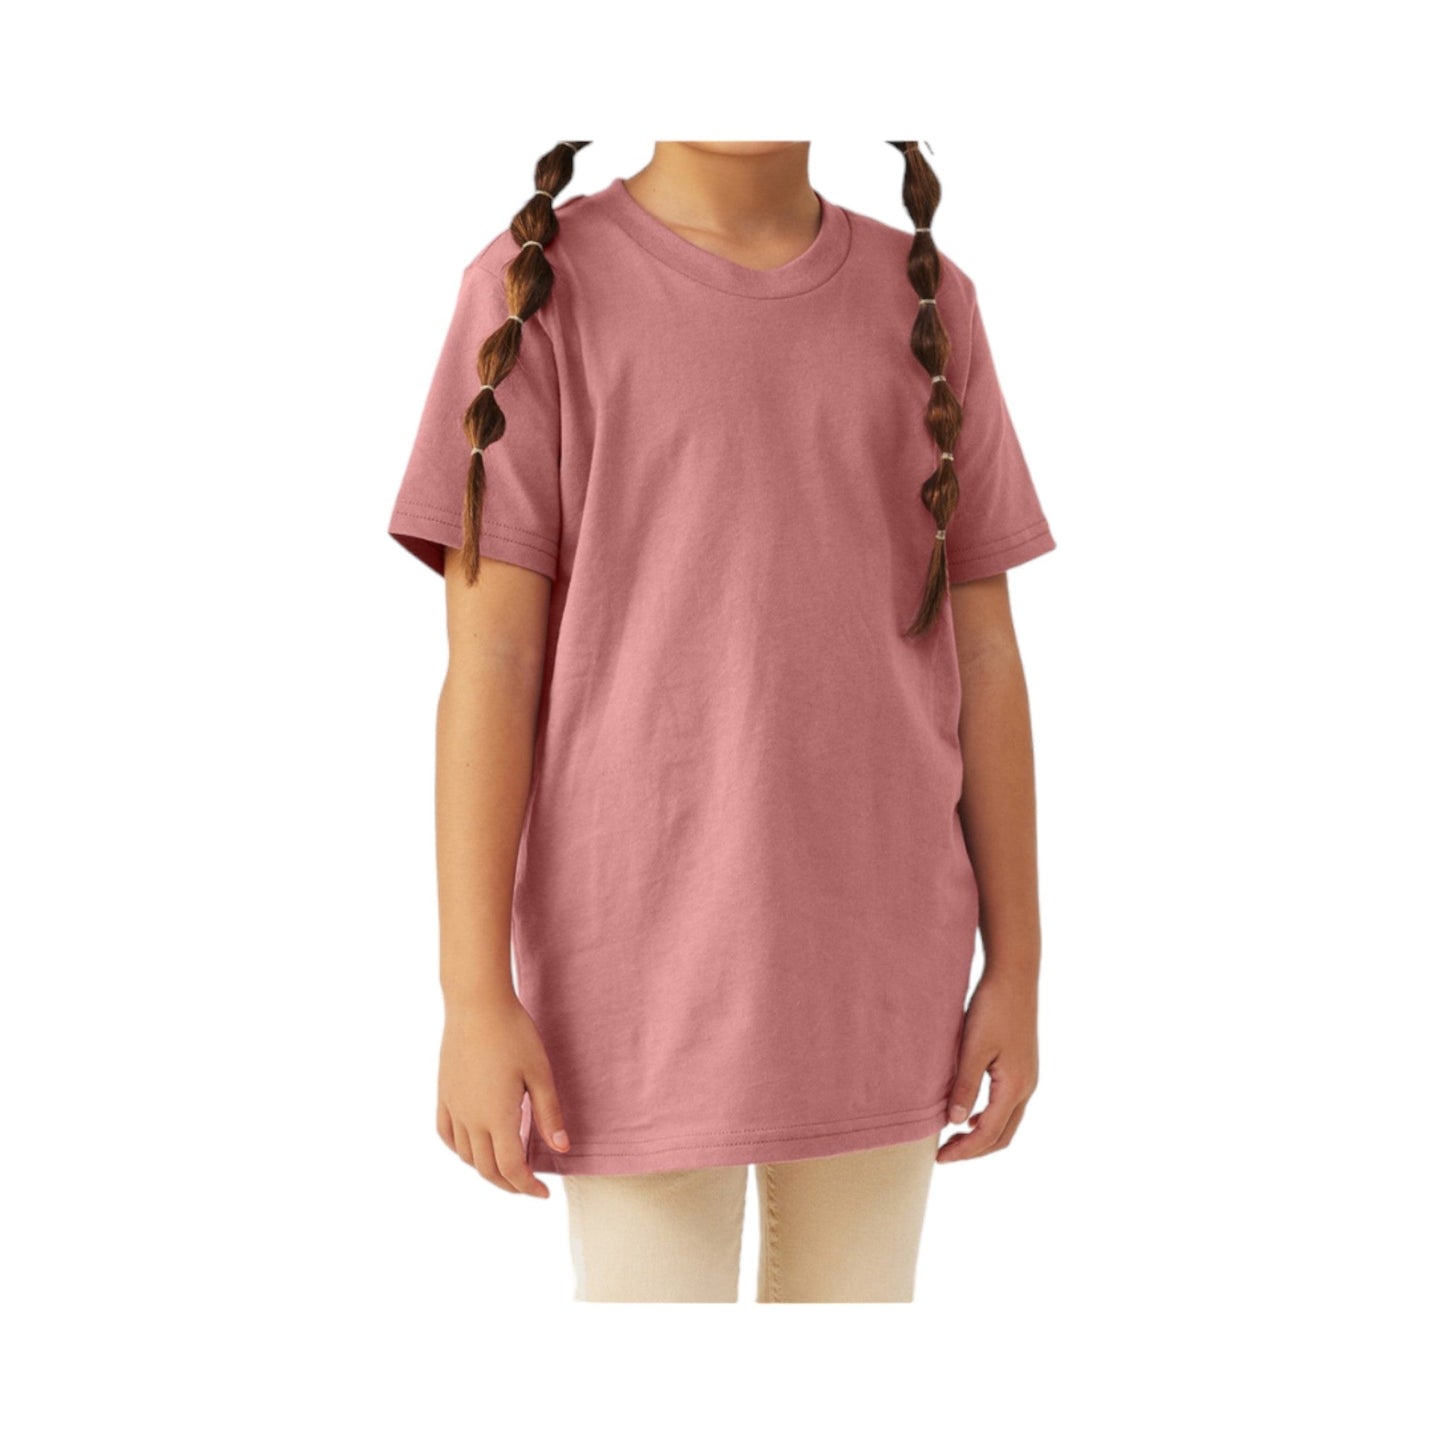 Toddler & Youth "Dance" Short Sleeve Tee